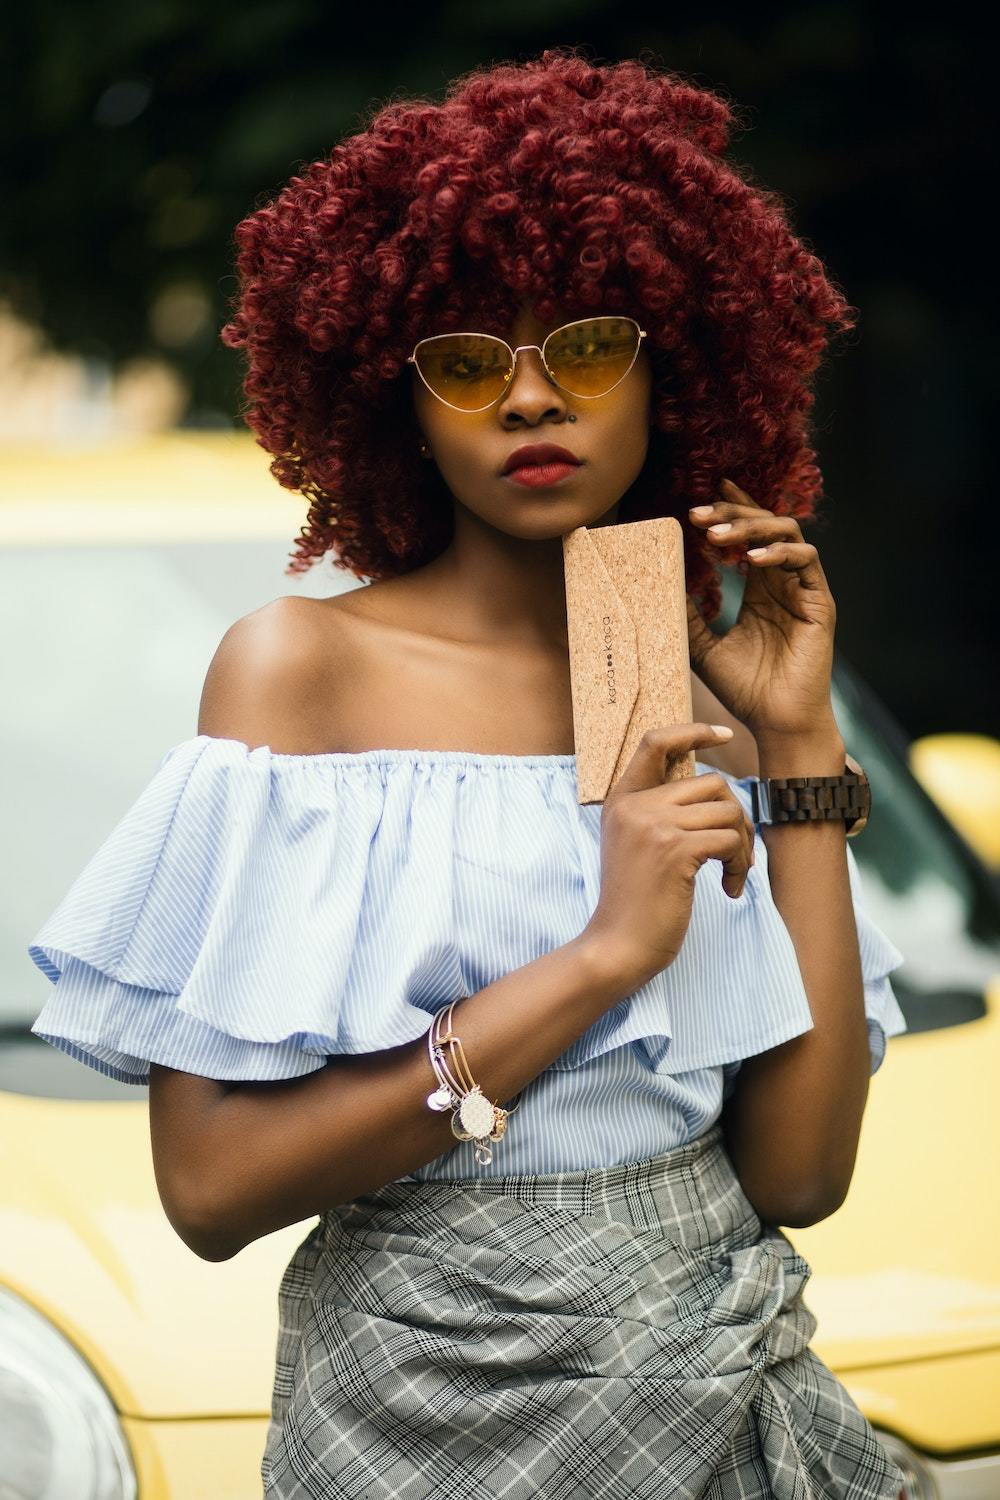 Burgundy Hair Styles That is Super Trendy this 2019